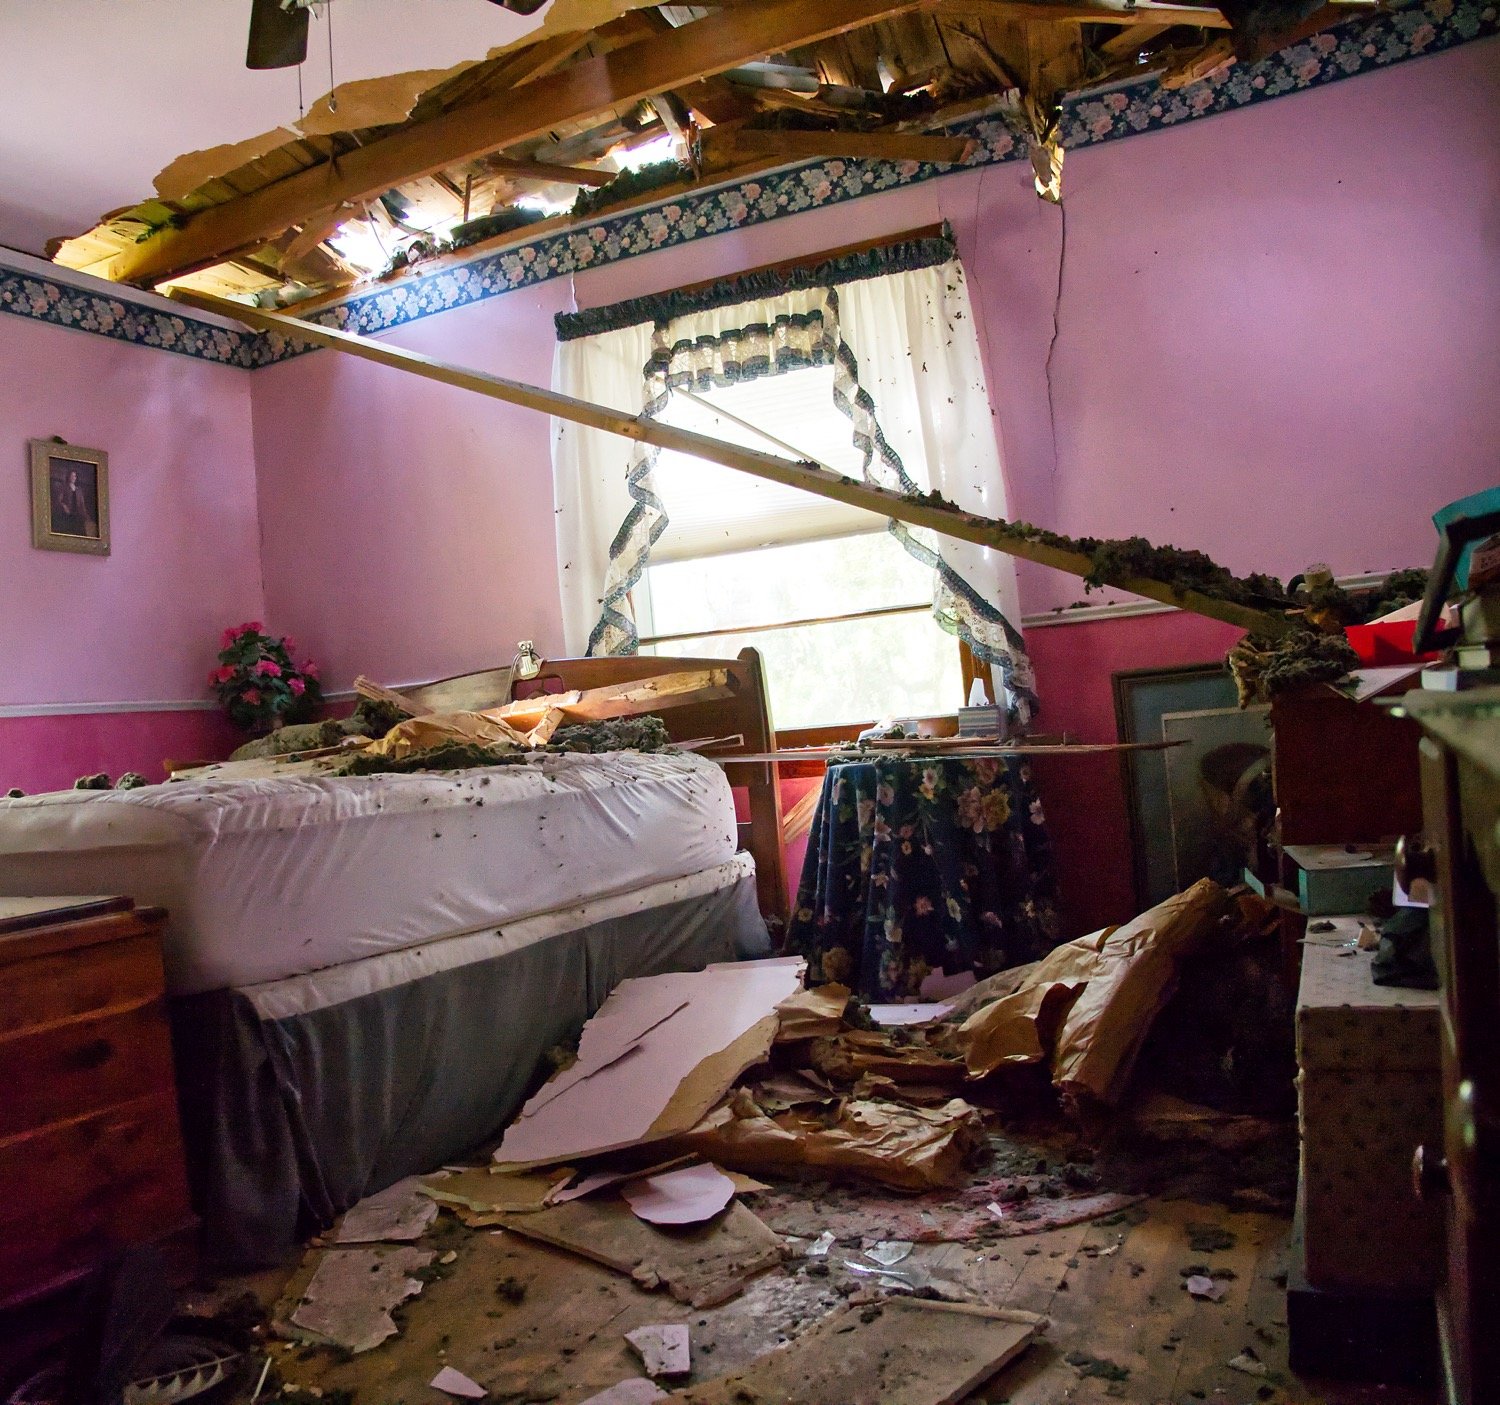 Christine Creswell is thankful she was not in her bedroom when a huge pine tree came crashing down on her Mineola home during Sunday evening’s thunderstorm.